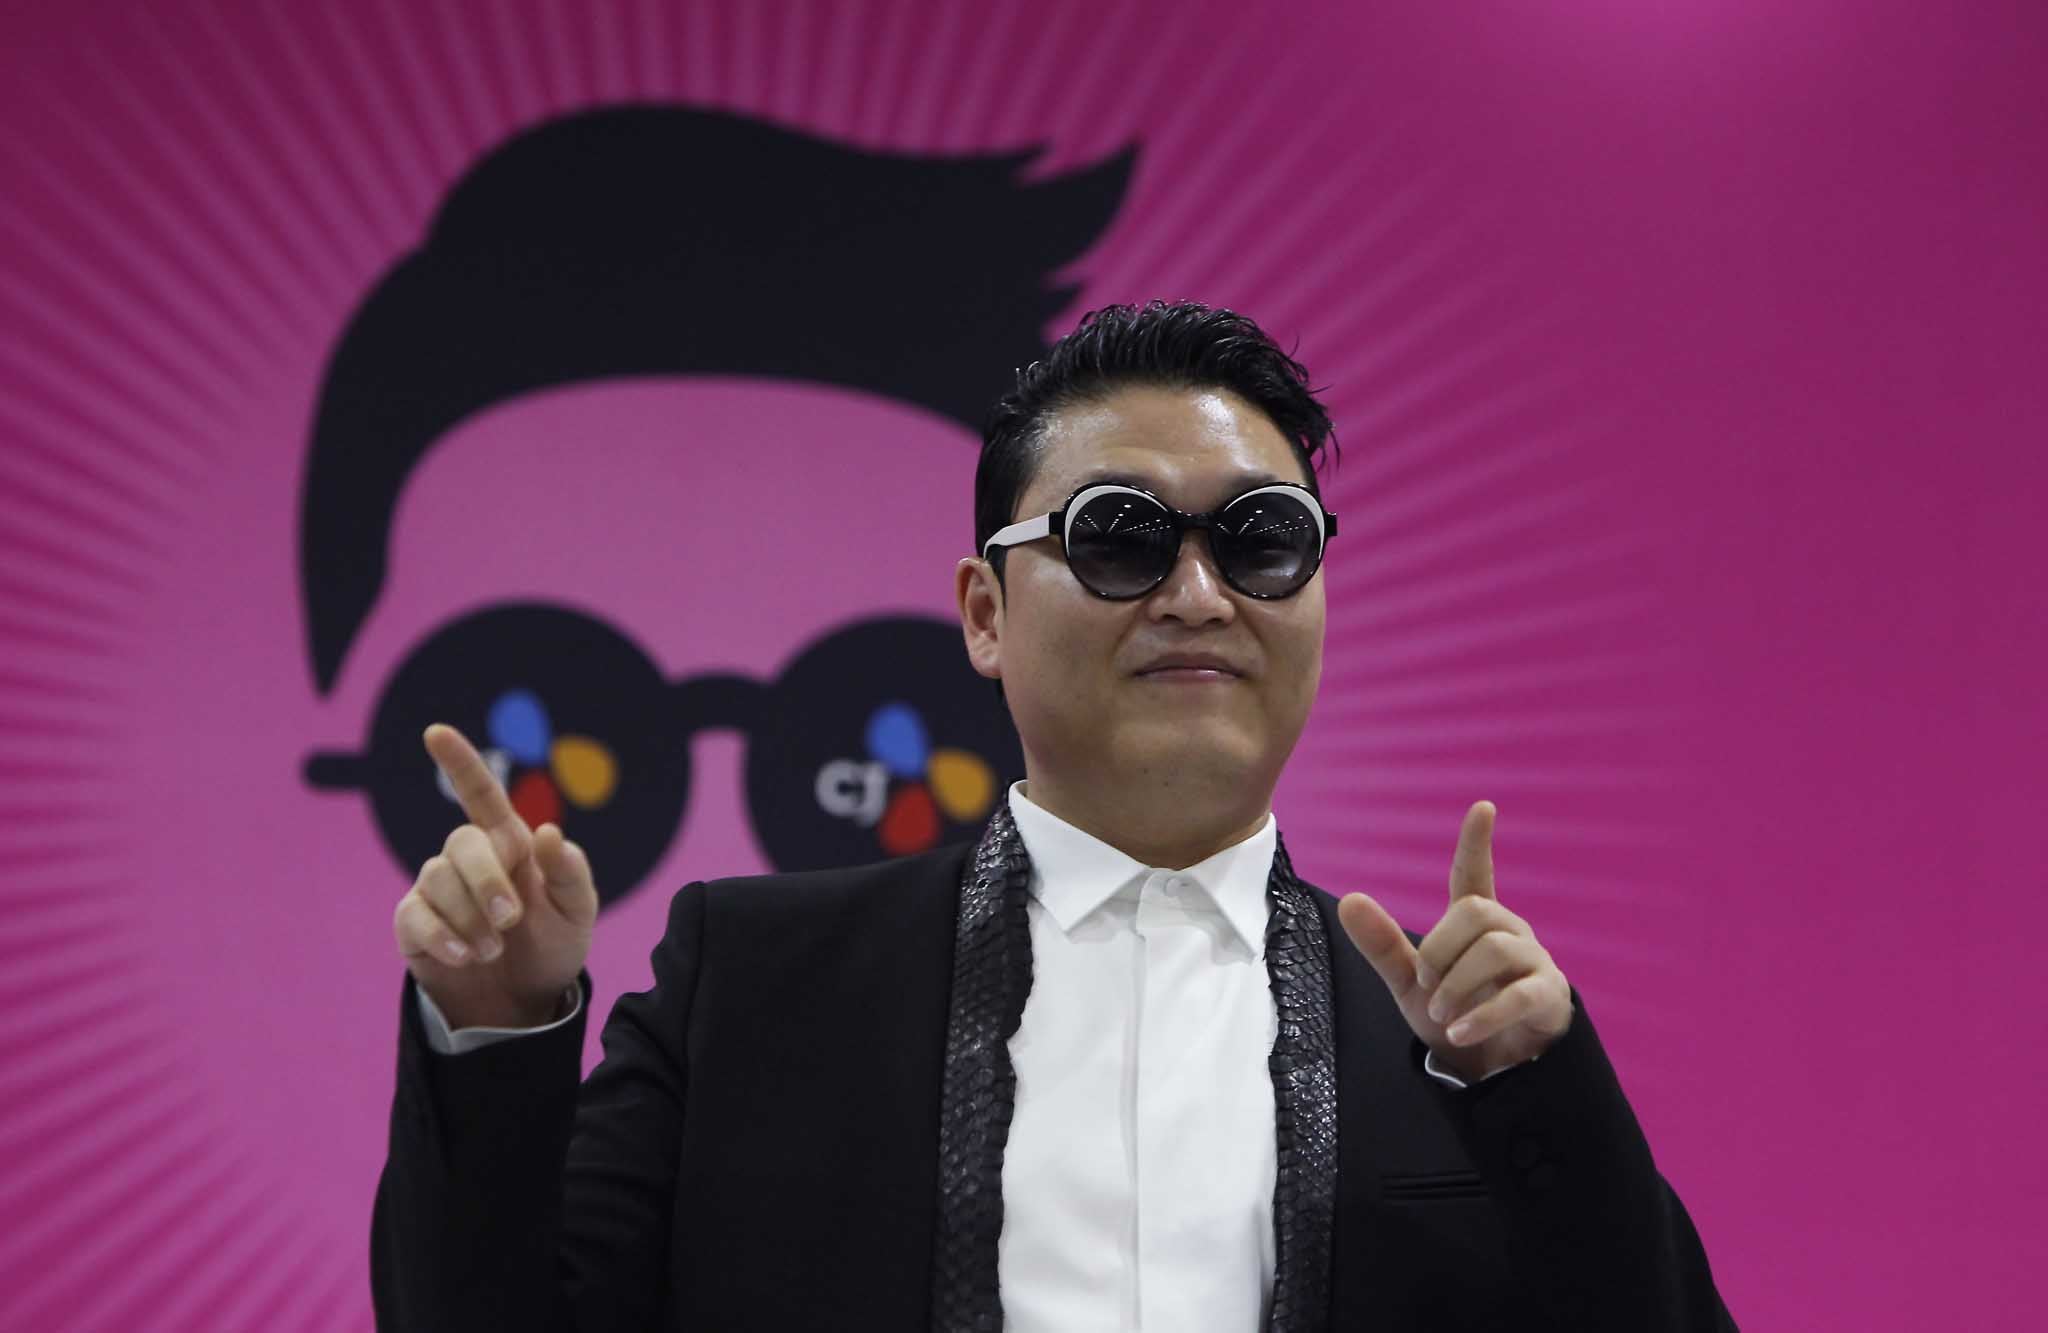 Psy has admitted to drinking a lot of vodka